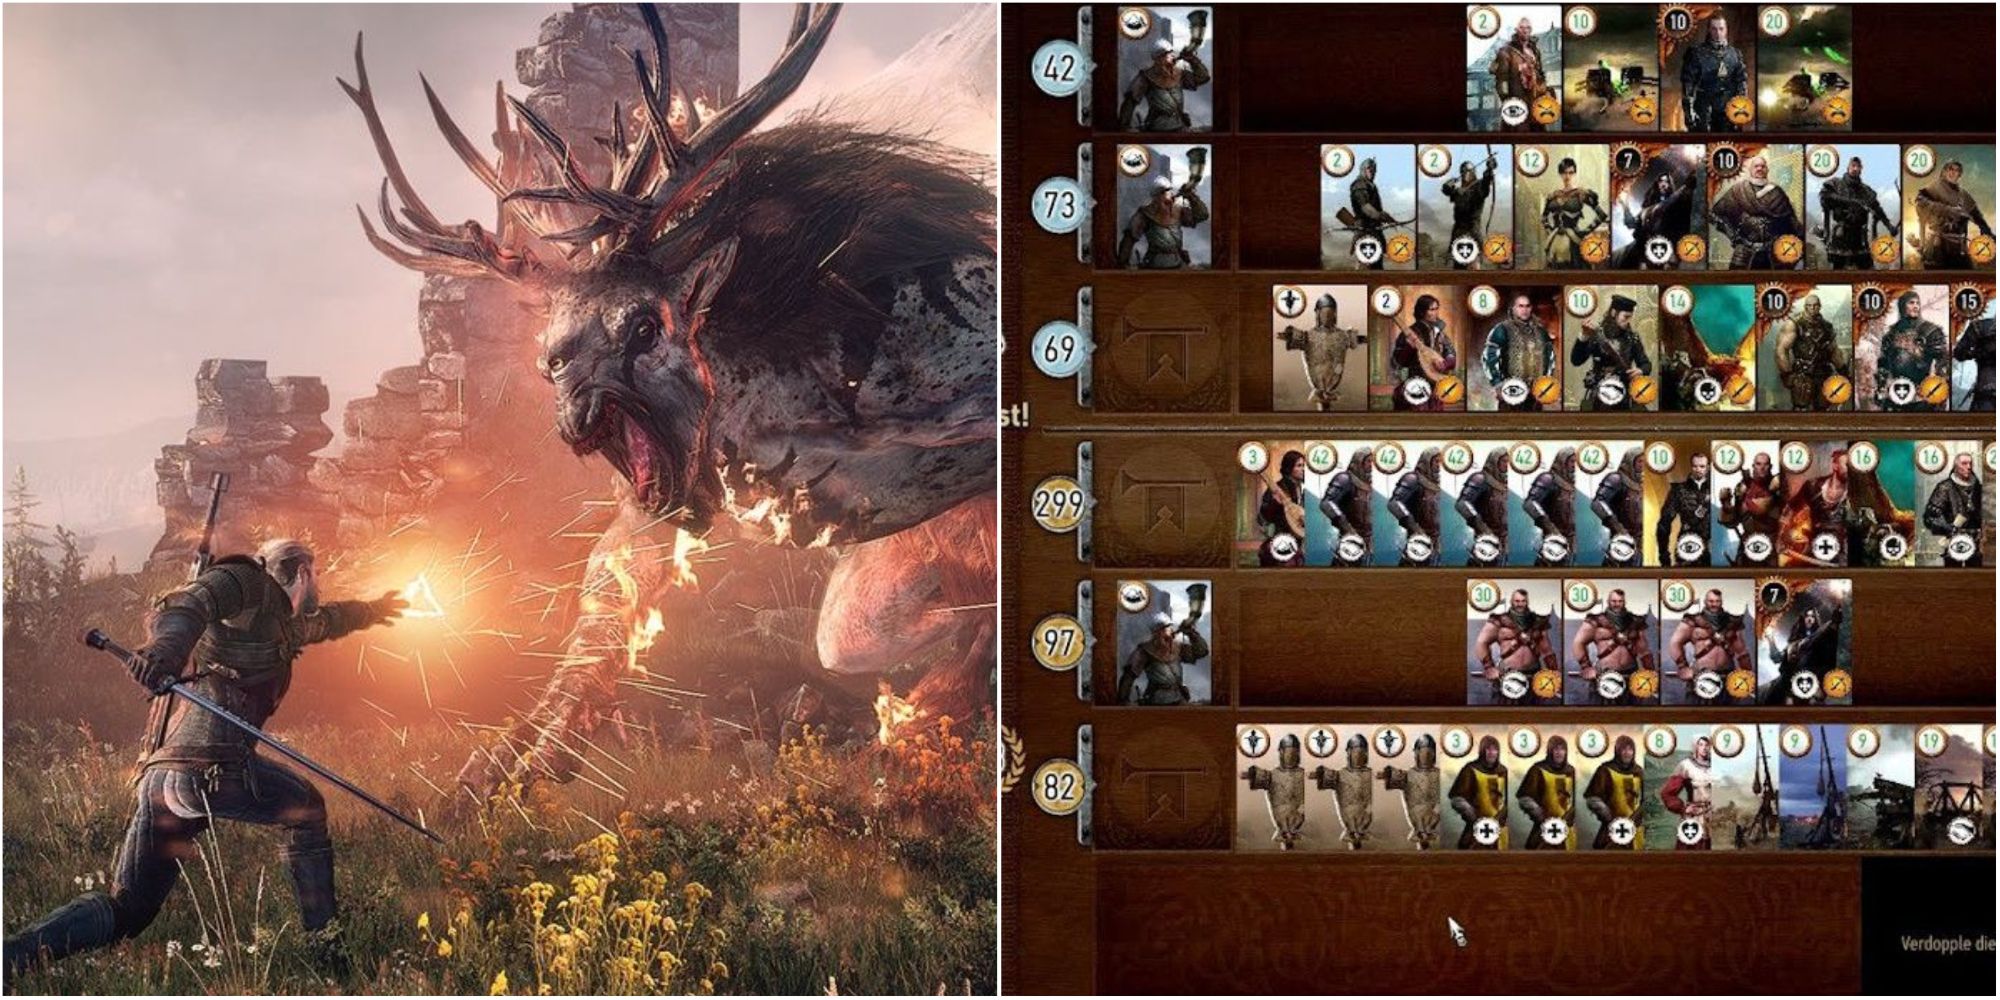 Screenshot collages of gameplay and Gwent in The Witcher 3: Wild Hunt.